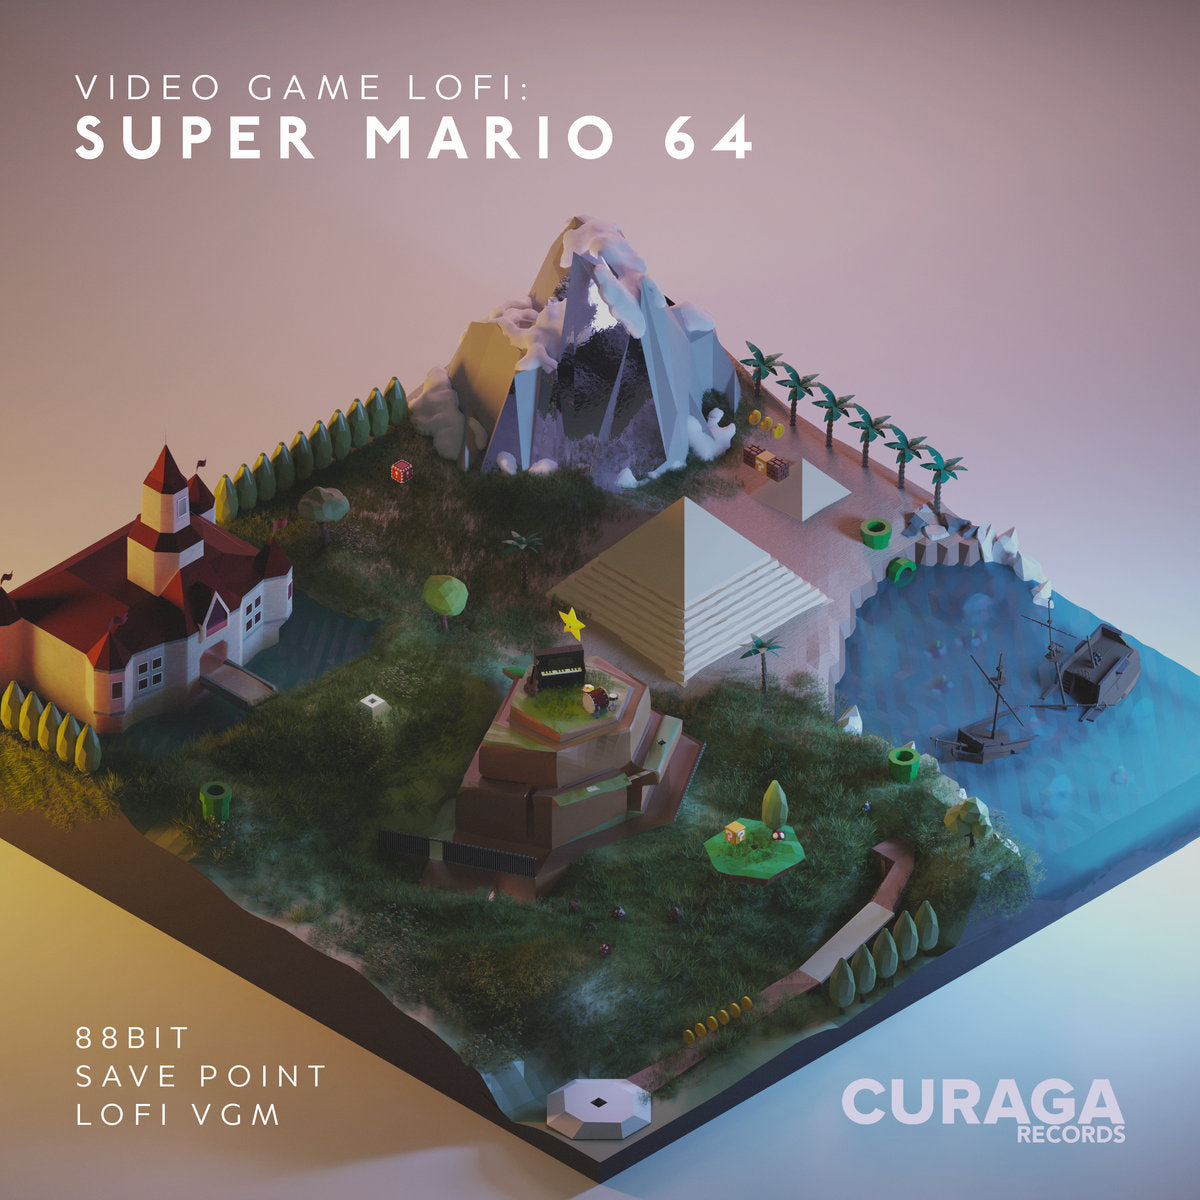 CURE-0018-V - 88bit and Save Point - Video Game LoFi: Super Mario 64